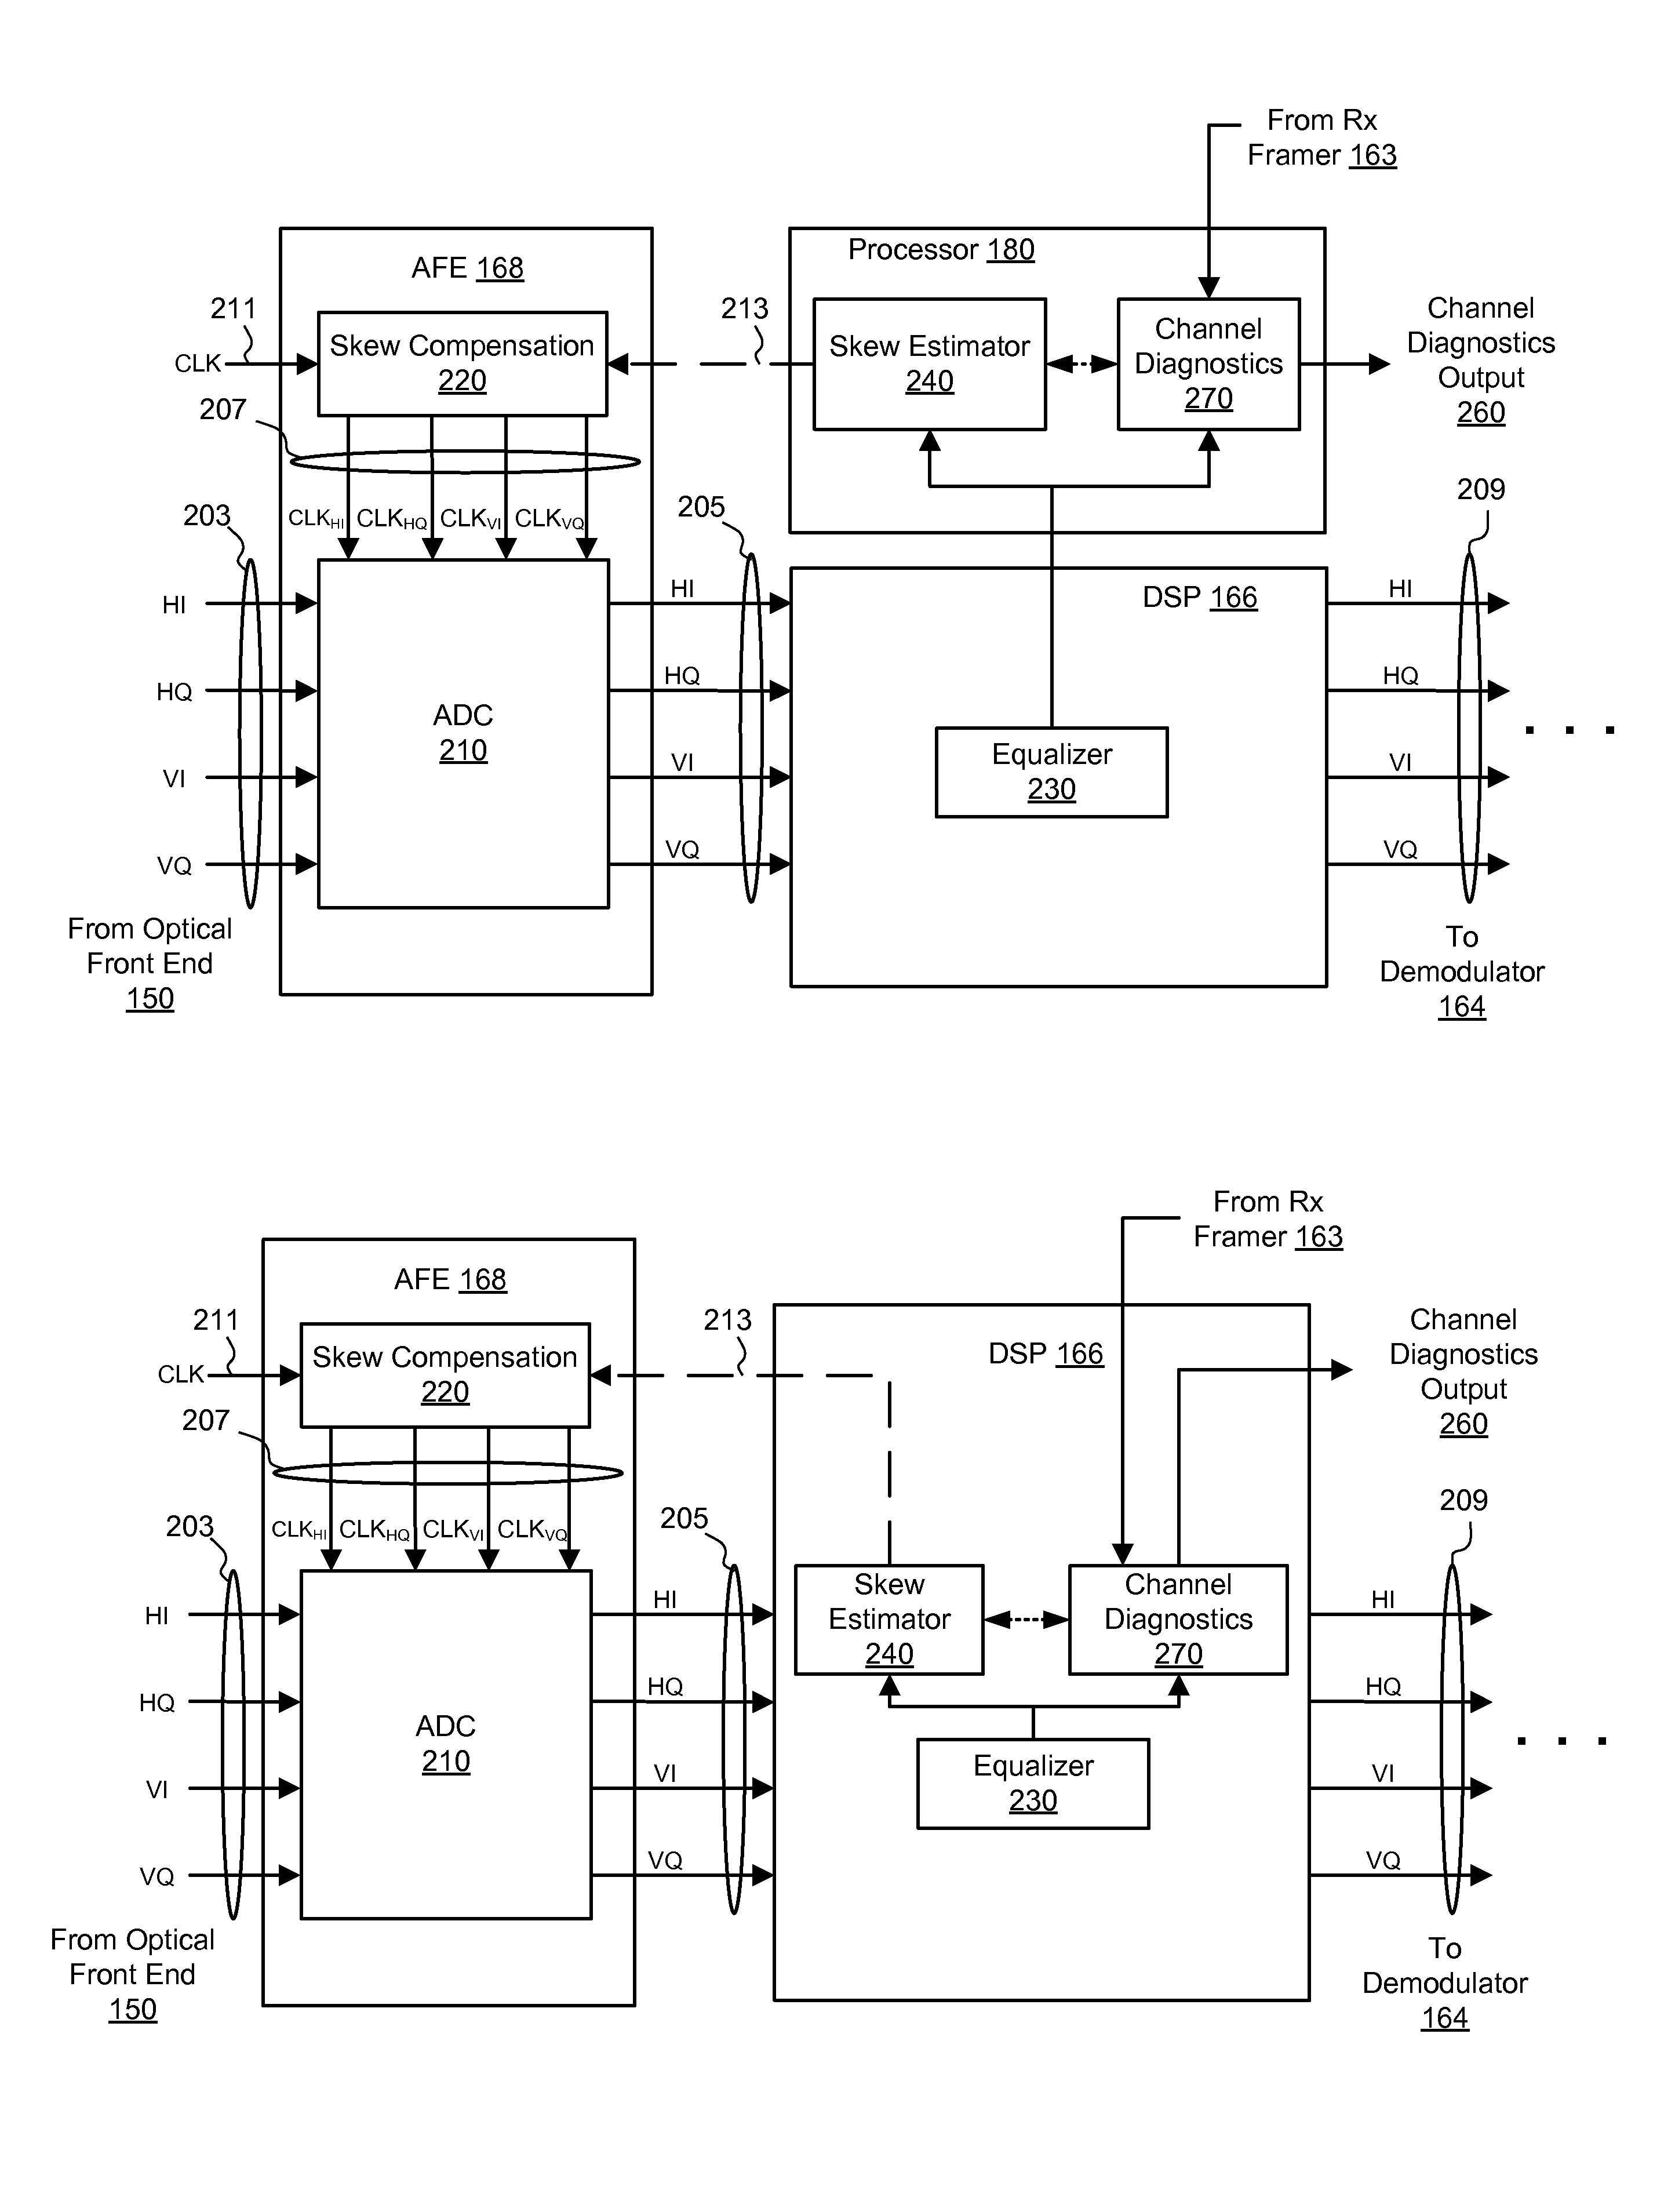 Reset in a receiver using center of gravity of equalizer coefficients